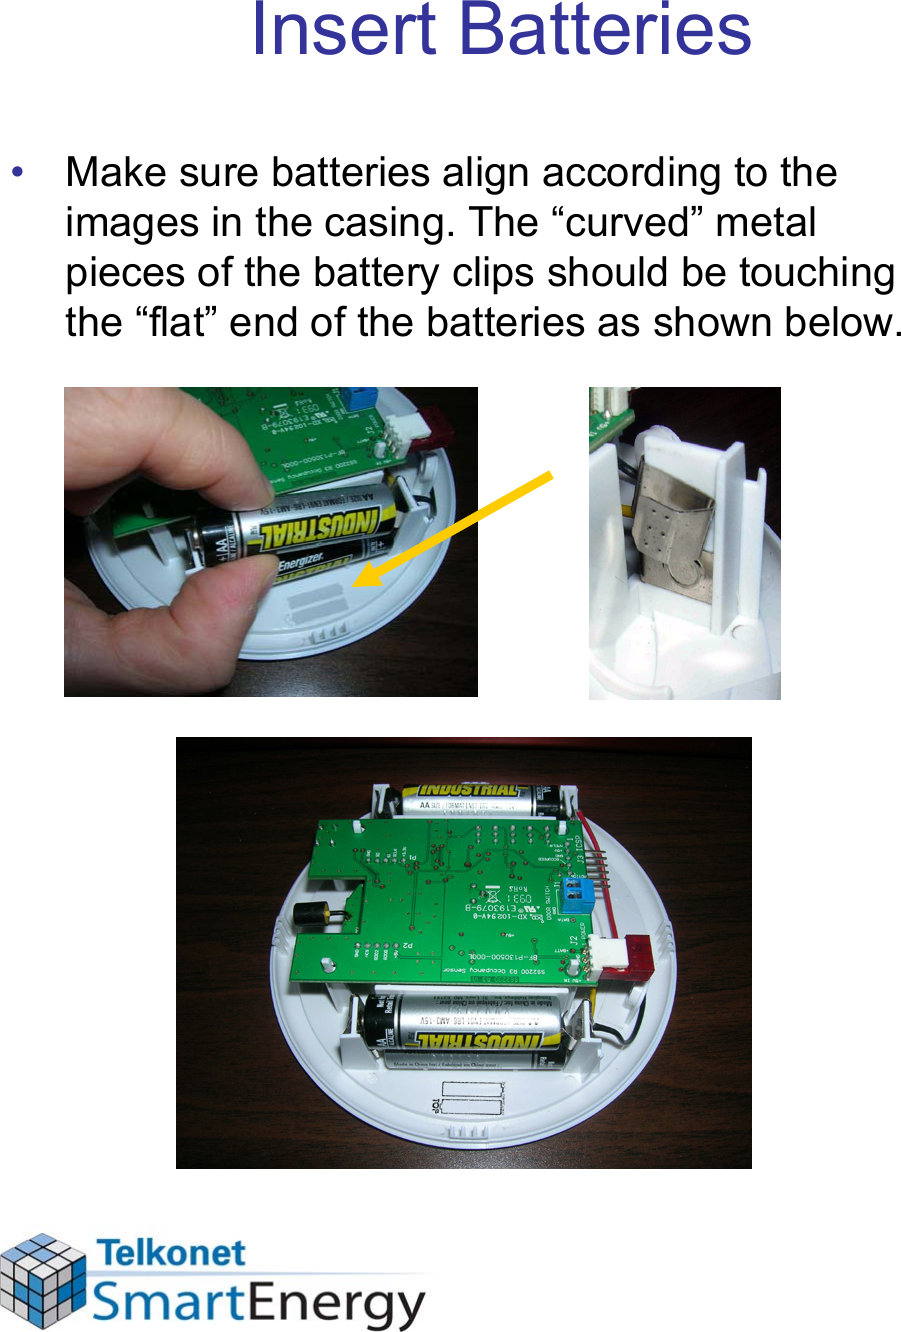 Insert Batteries• Make sure batteries align according to the images in the casing. The “curved” metal pieces of the battery clips should be touching the “flat” end of the batteries as shown below.